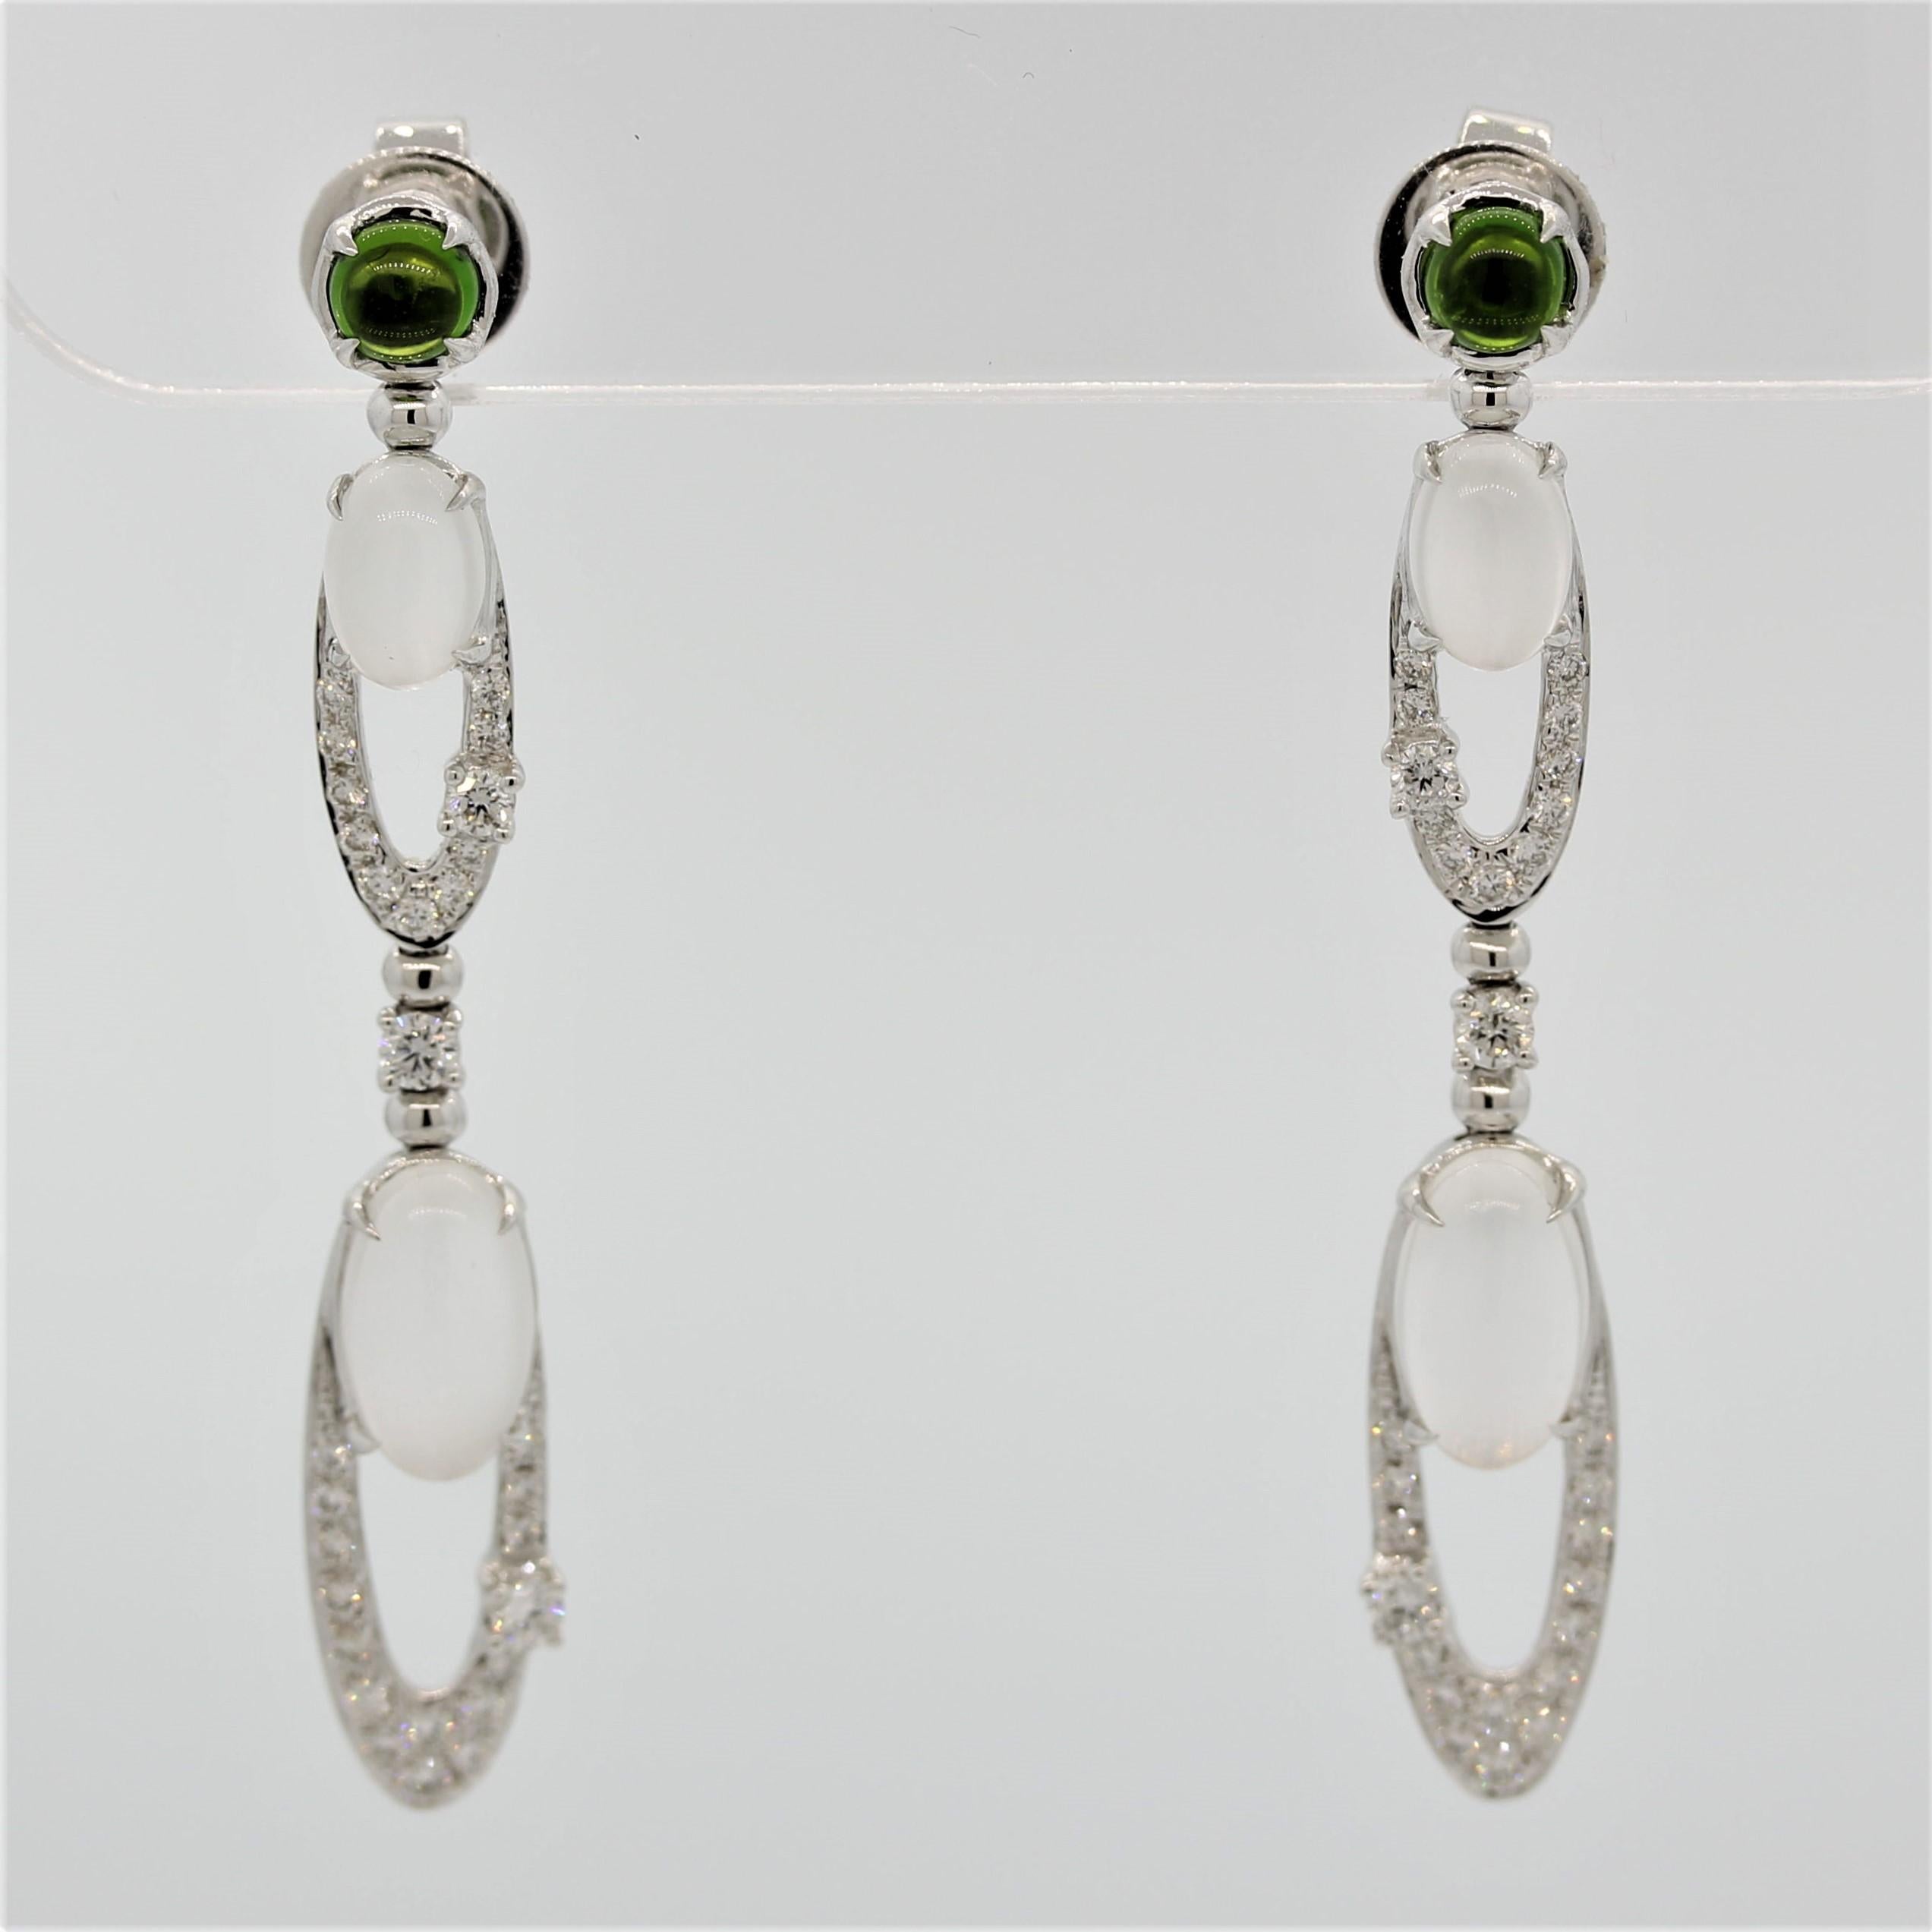 A stylish pair of earrings with a unique combination of gemstones. It features 4 moonstones weighing a total of 15.27 carats, which have great adularescence (special phenomenon of moonstones). They are accented by 0.66 carats of round brilliant cut